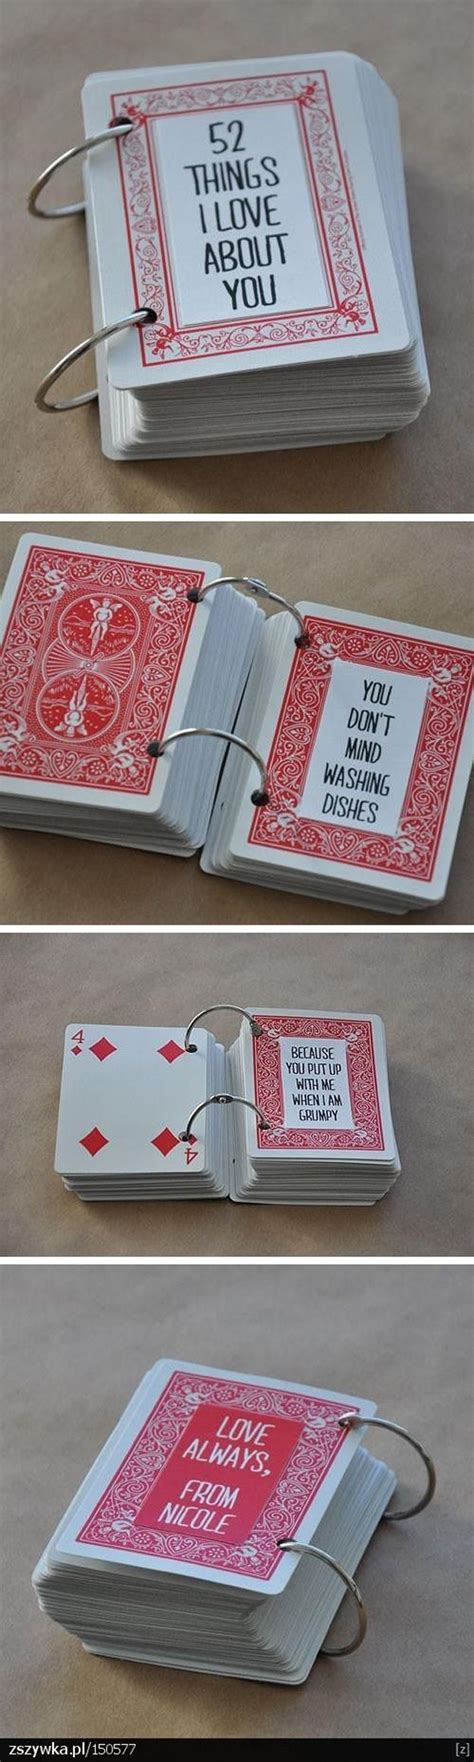 Best 20 Playing Card Crafts Ideas On Pinterest Playing Card Games